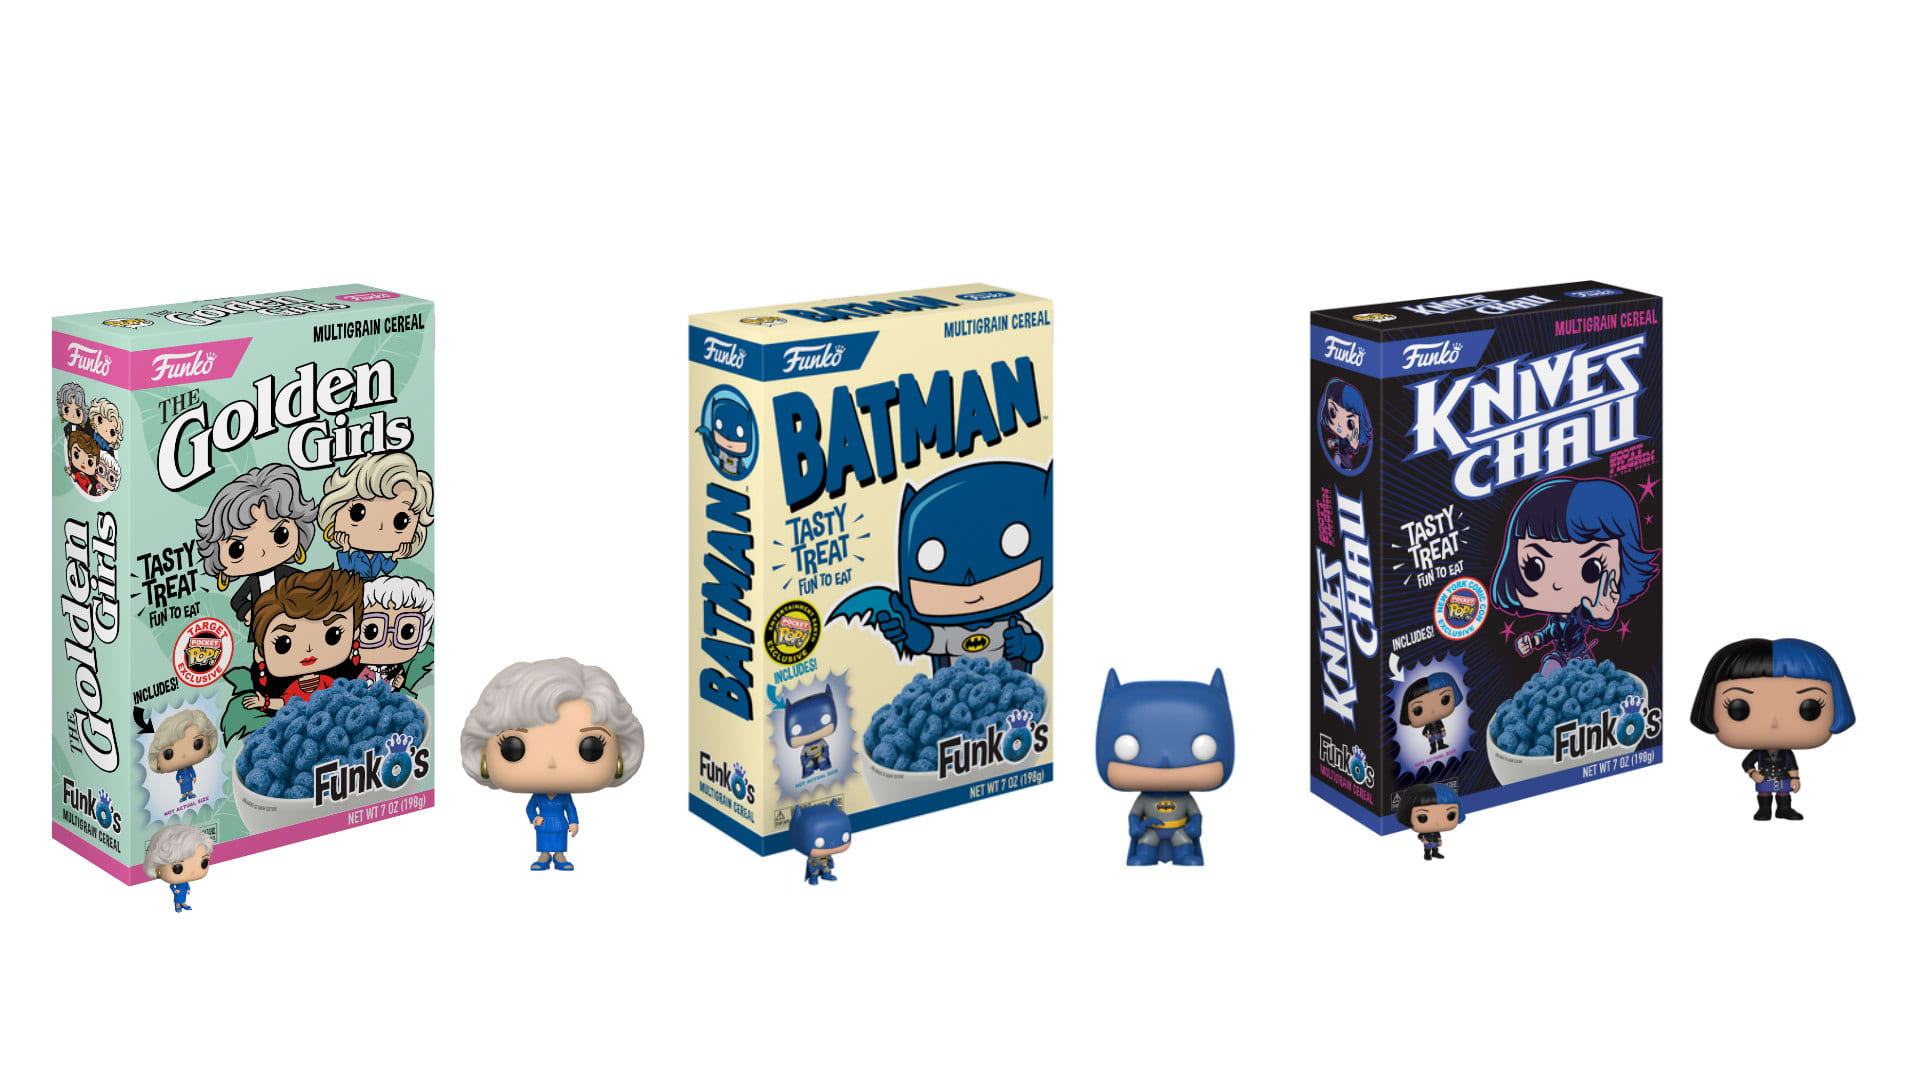 Cereal sales are on the decline, but not for toy maker Funko